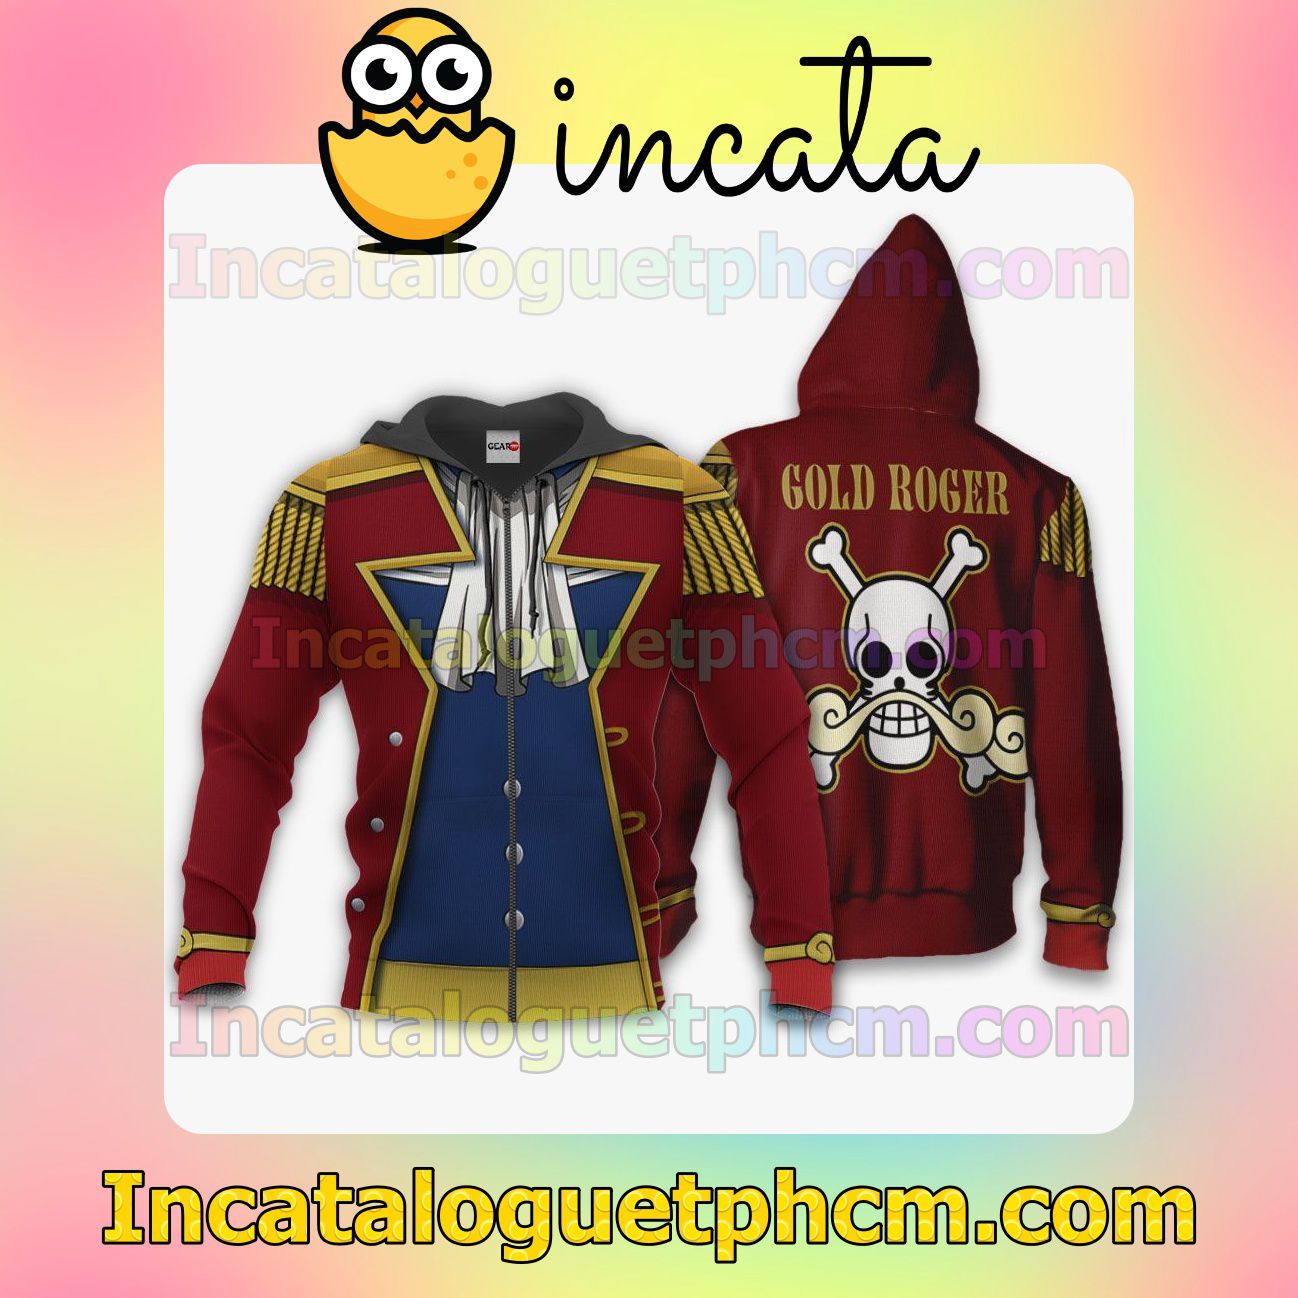 One Piece Gol D. Roger Costume Anime Clothing Merch Zip Hoodie Jacket Shirts